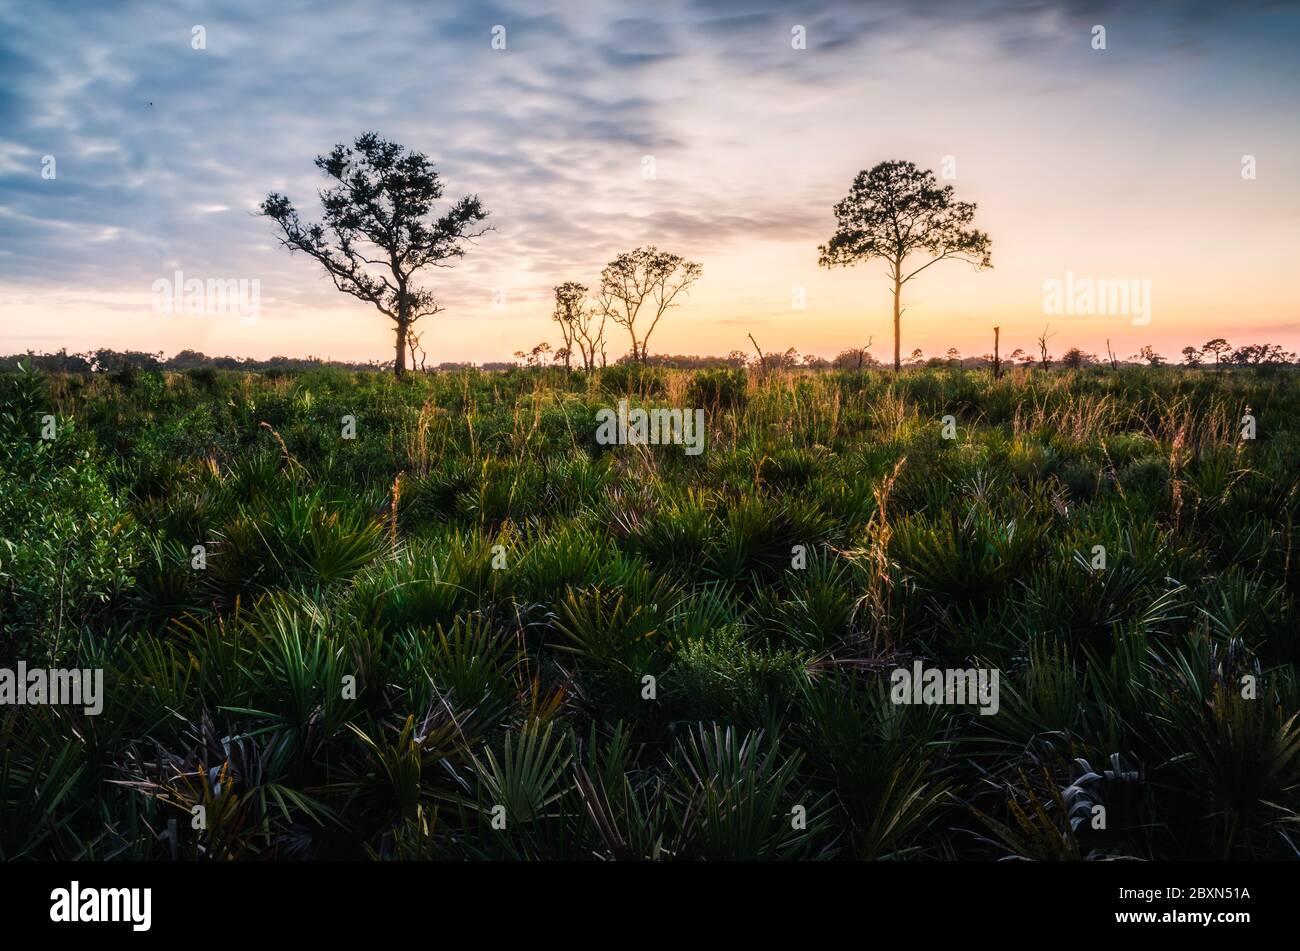 Shrub-like palms in the foreground of a sunlit pine prairie. Myakka River State Park. Stock Photo